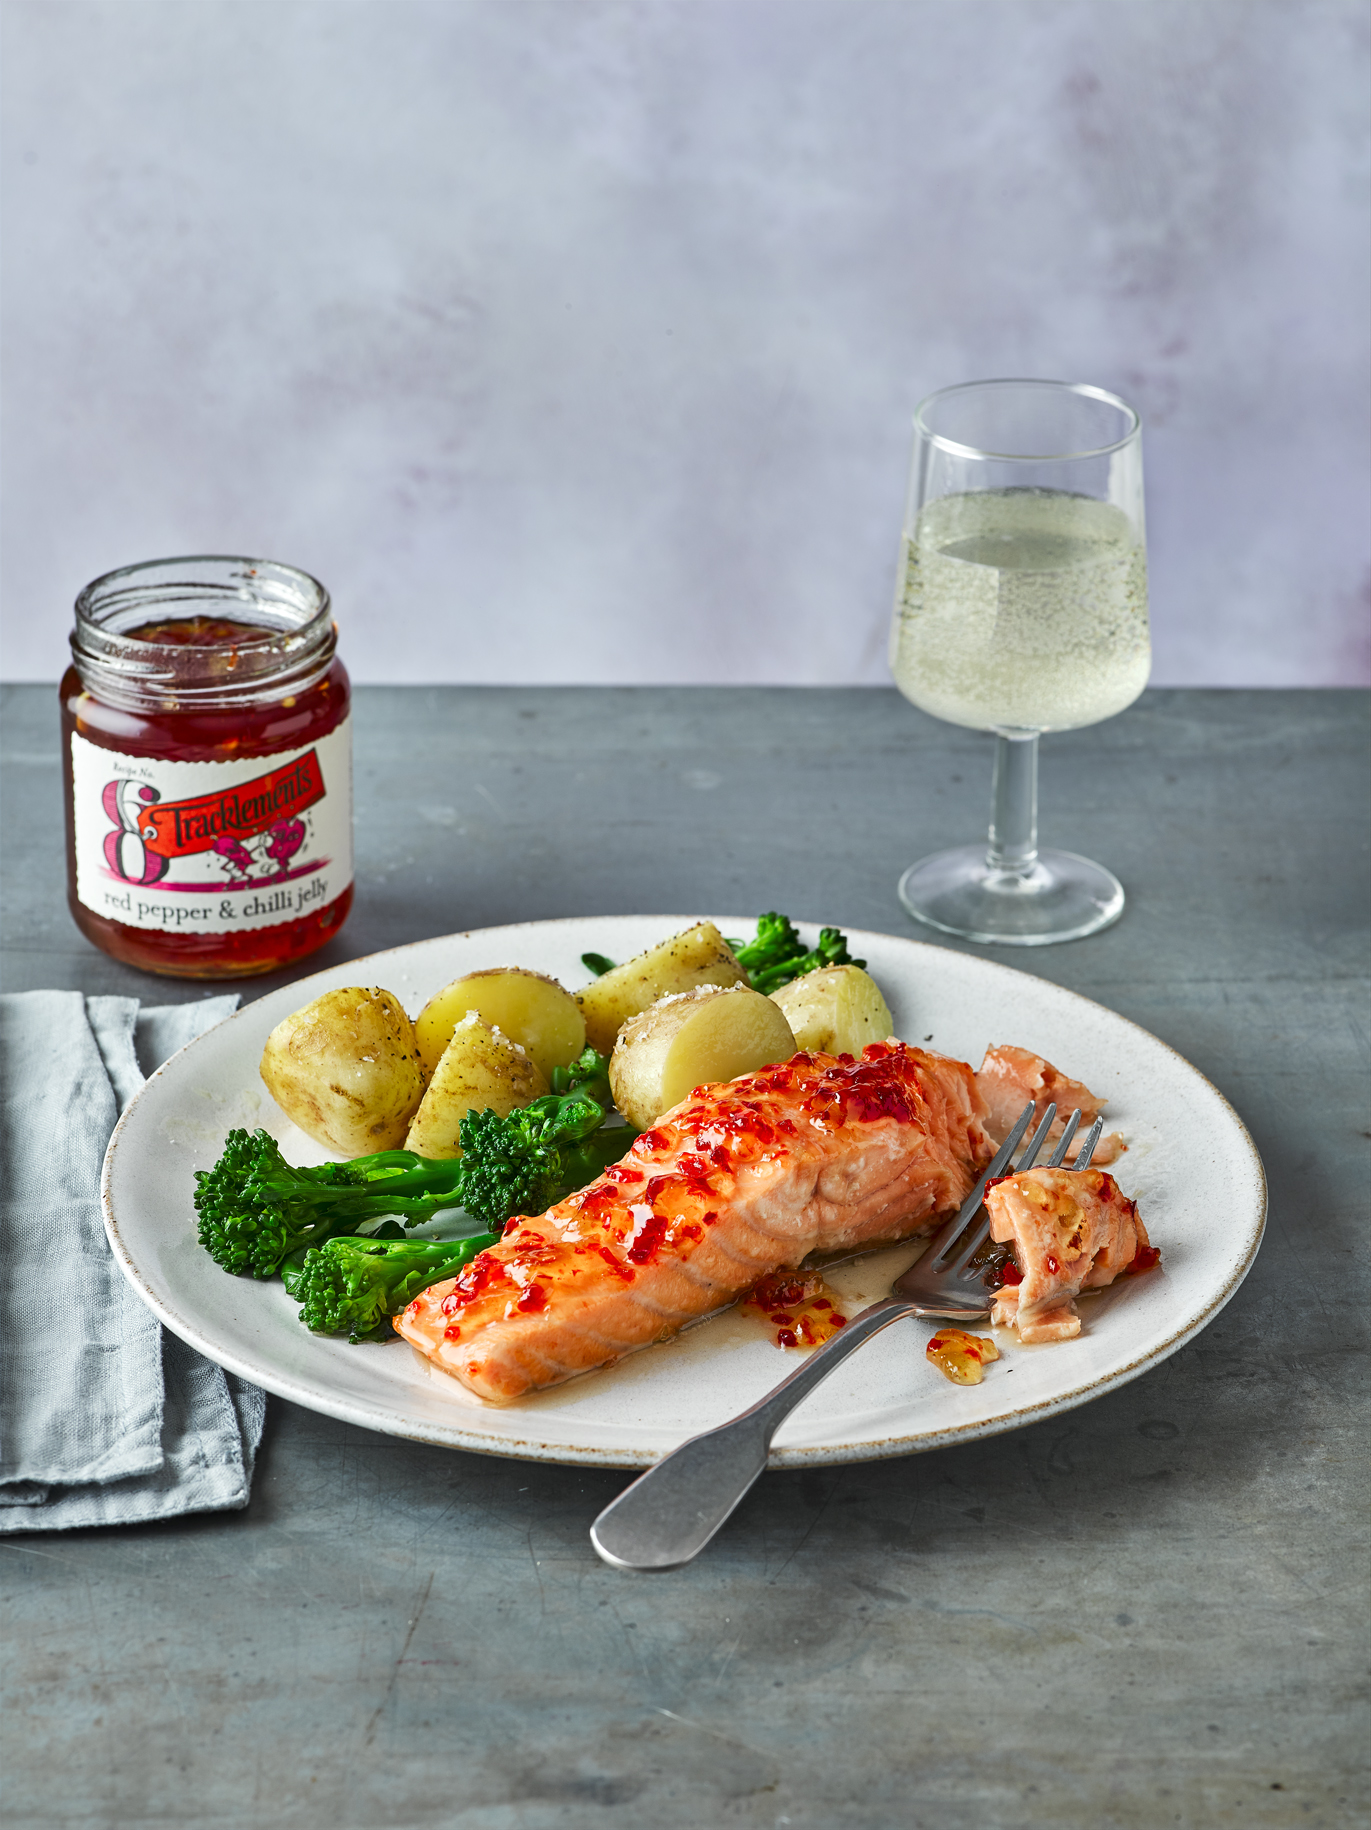 Baked Salmon with Red Pepper & Chilli Jelly